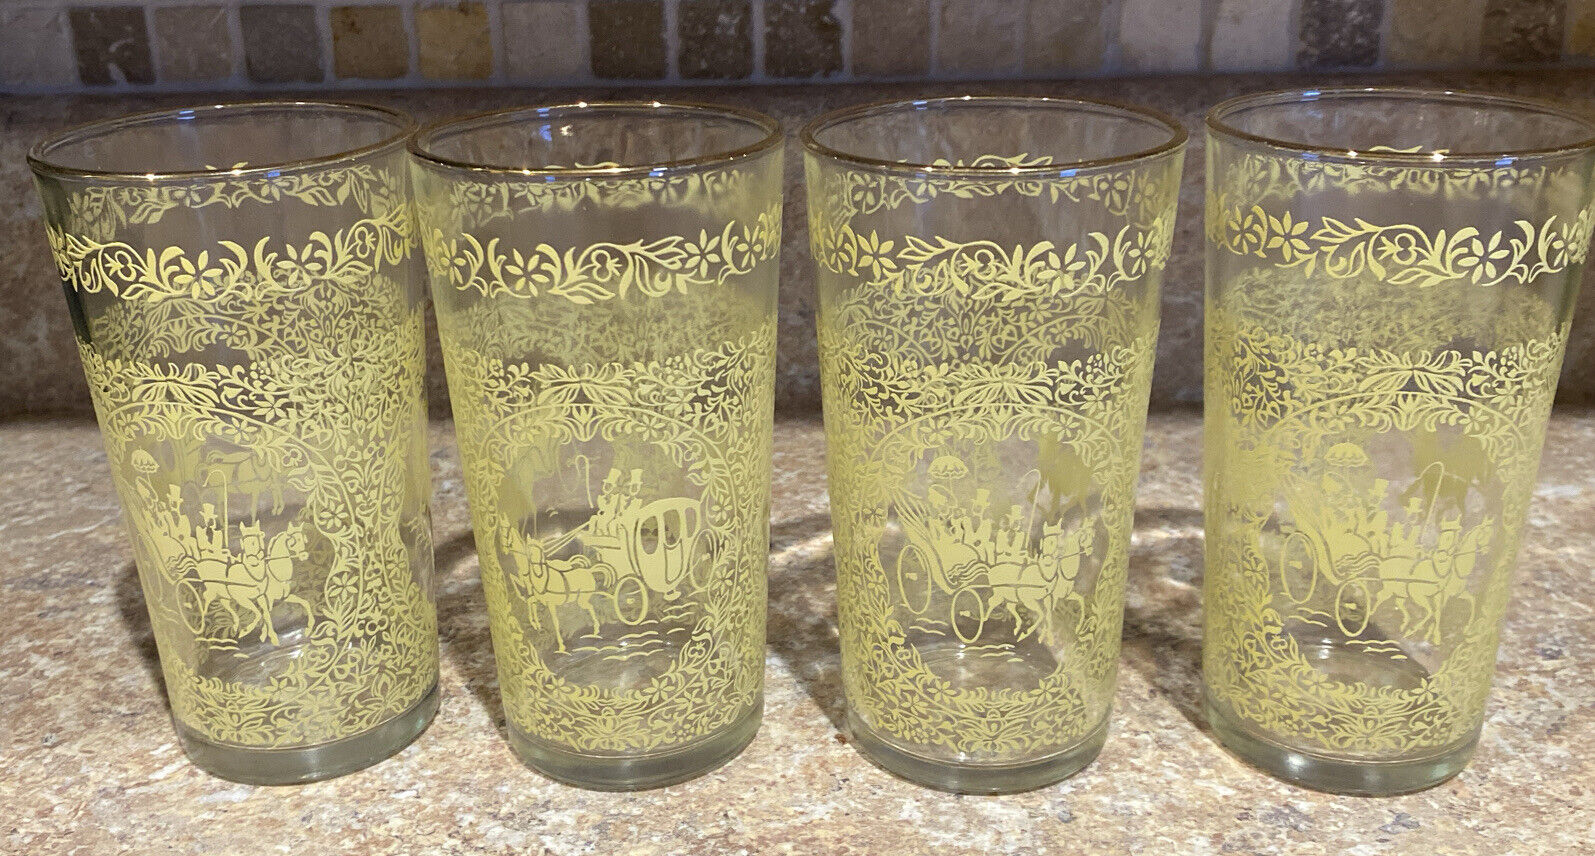 4 Hazel Atlas Monticello Yellow And Gold Drinking Glasses Horse Buggy Images